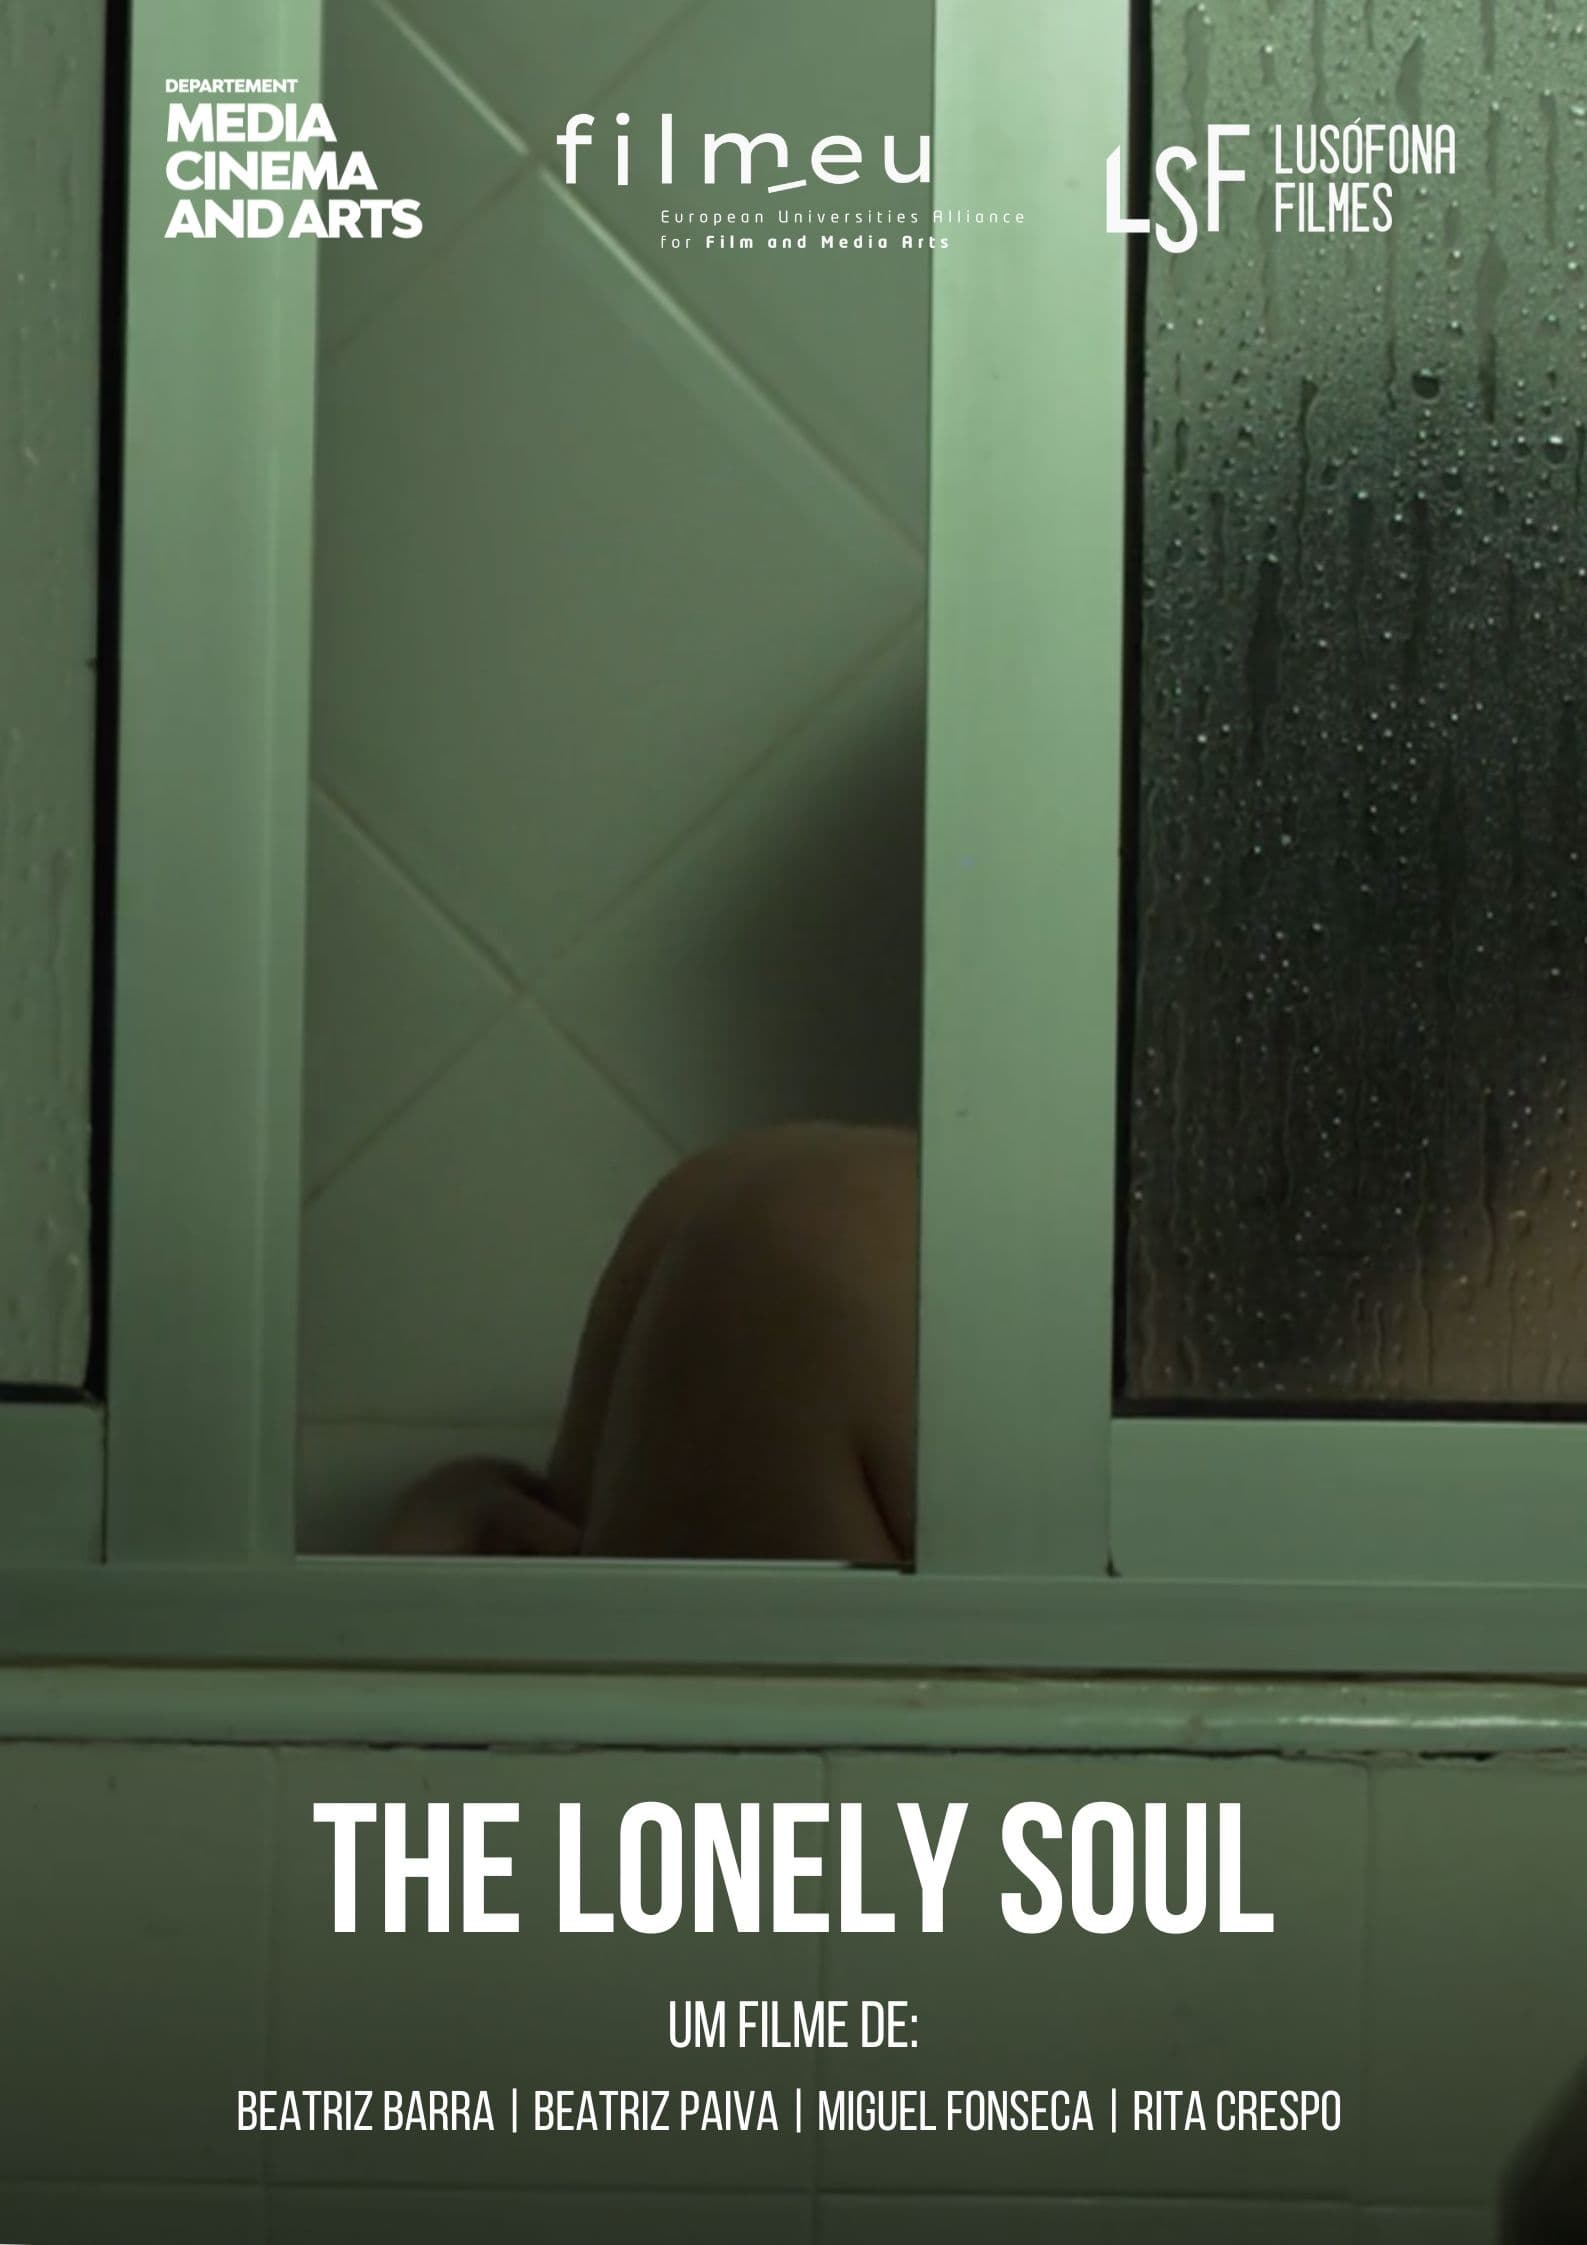 The Lonely Soul